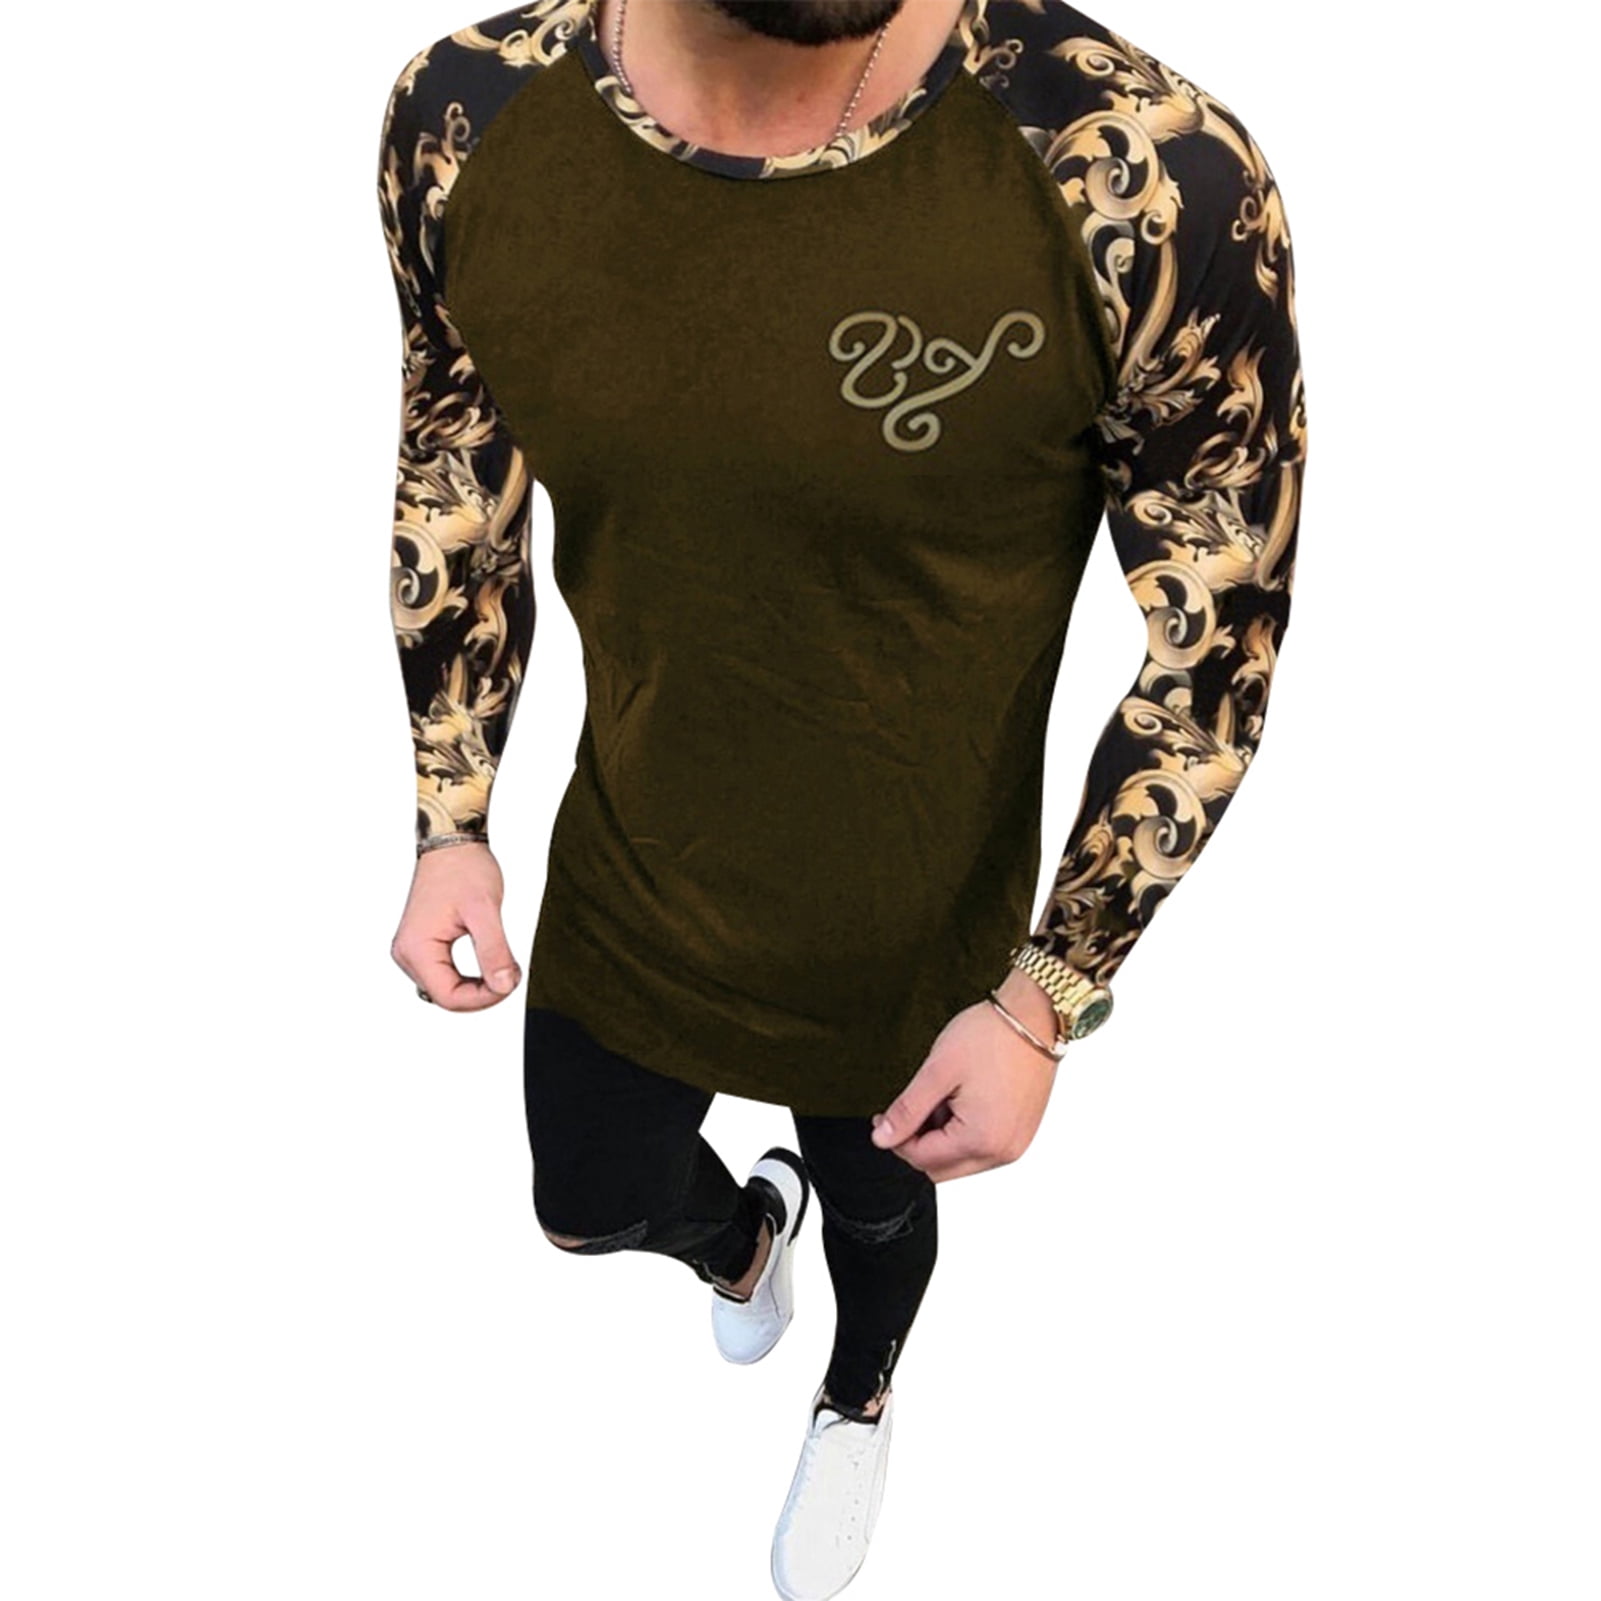 Fashion Mens Slim Fit Round Neck Long Sleeve Tattoo Print Casual T-Shirt Top 